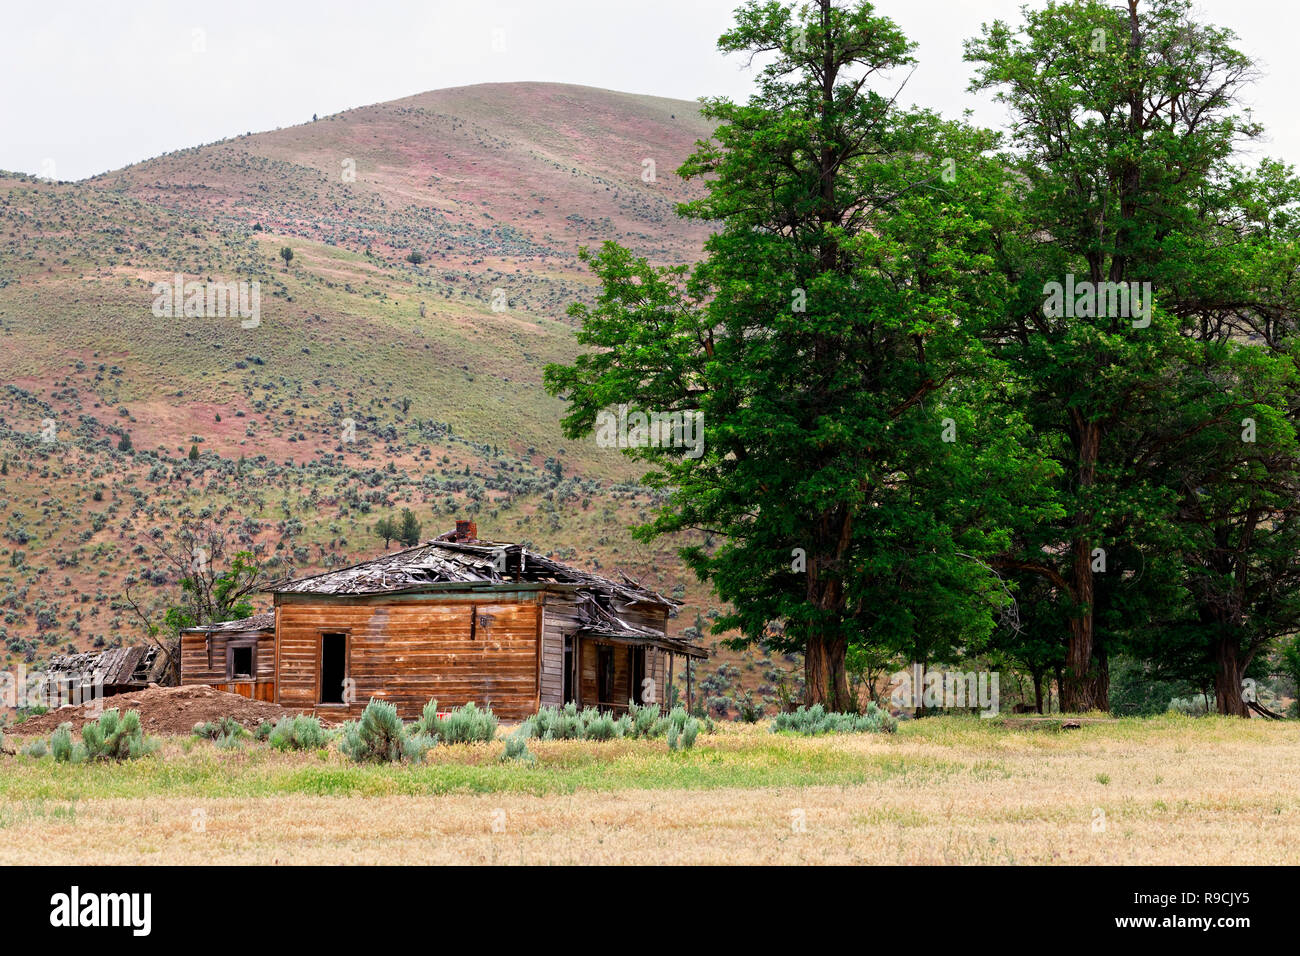 42,893.03469 high desert dilapidated & abandoned old unpainted single-story square ranch cabin in sagebrush hills, with shading old deciduous trees Stock Photo